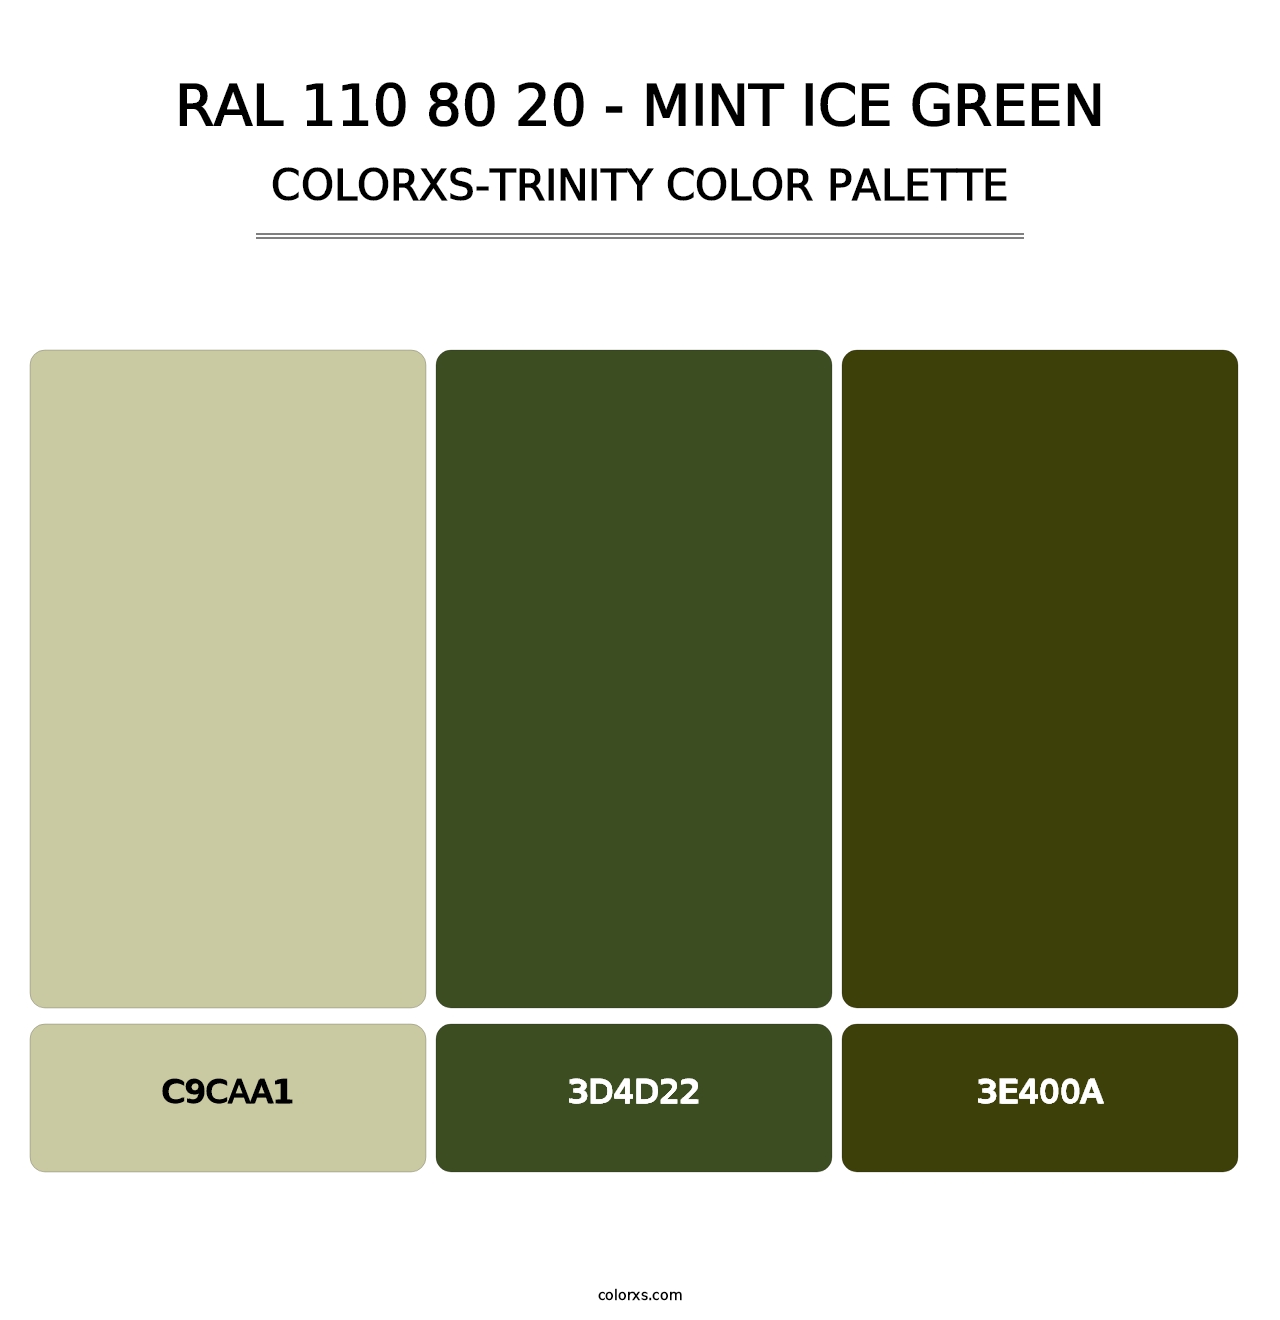 RAL 110 80 20 - Mint Ice Green - Colorxs Trinity Palette